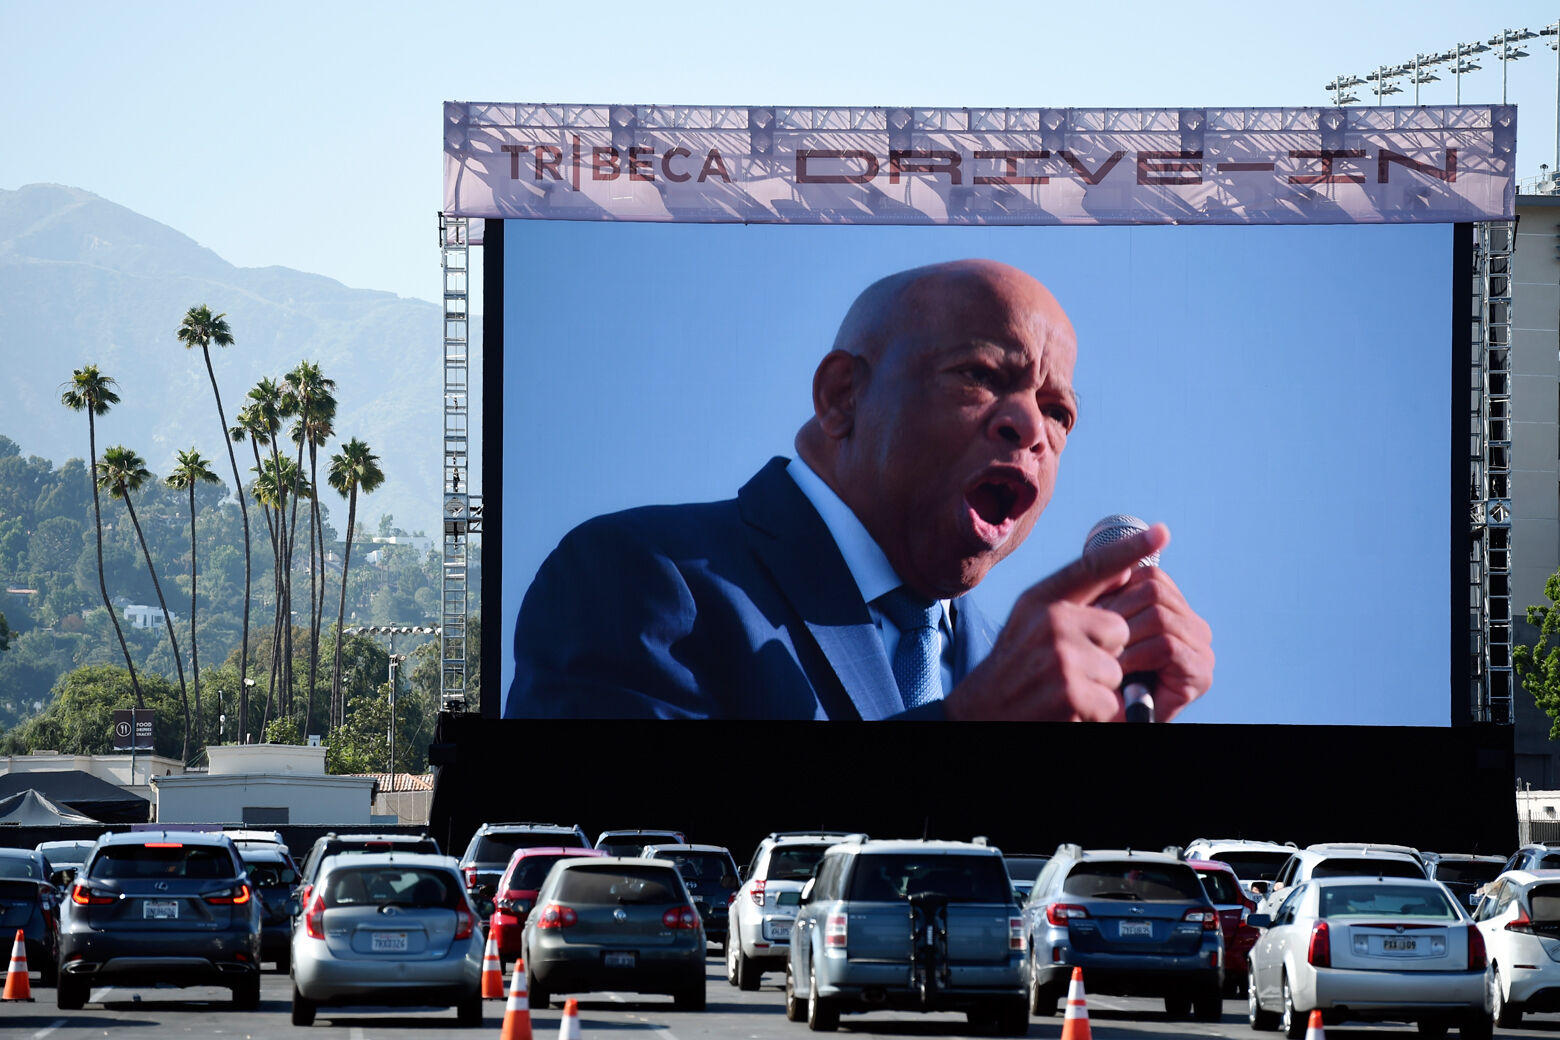 Rep. John Lewis, D-Ga., is seen onscreen in a scene from the documentary film "John Lewis: Good Trouble," on the opening night of the Tribeca Drive-In, Thursday, July 2, 2020, at the Rose Bowl in Pasadena, Calif. Complimentary access was offered to essential workers for the first night of the limited-engagement drive-in film series. (AP Photo/Chris Pizzello)